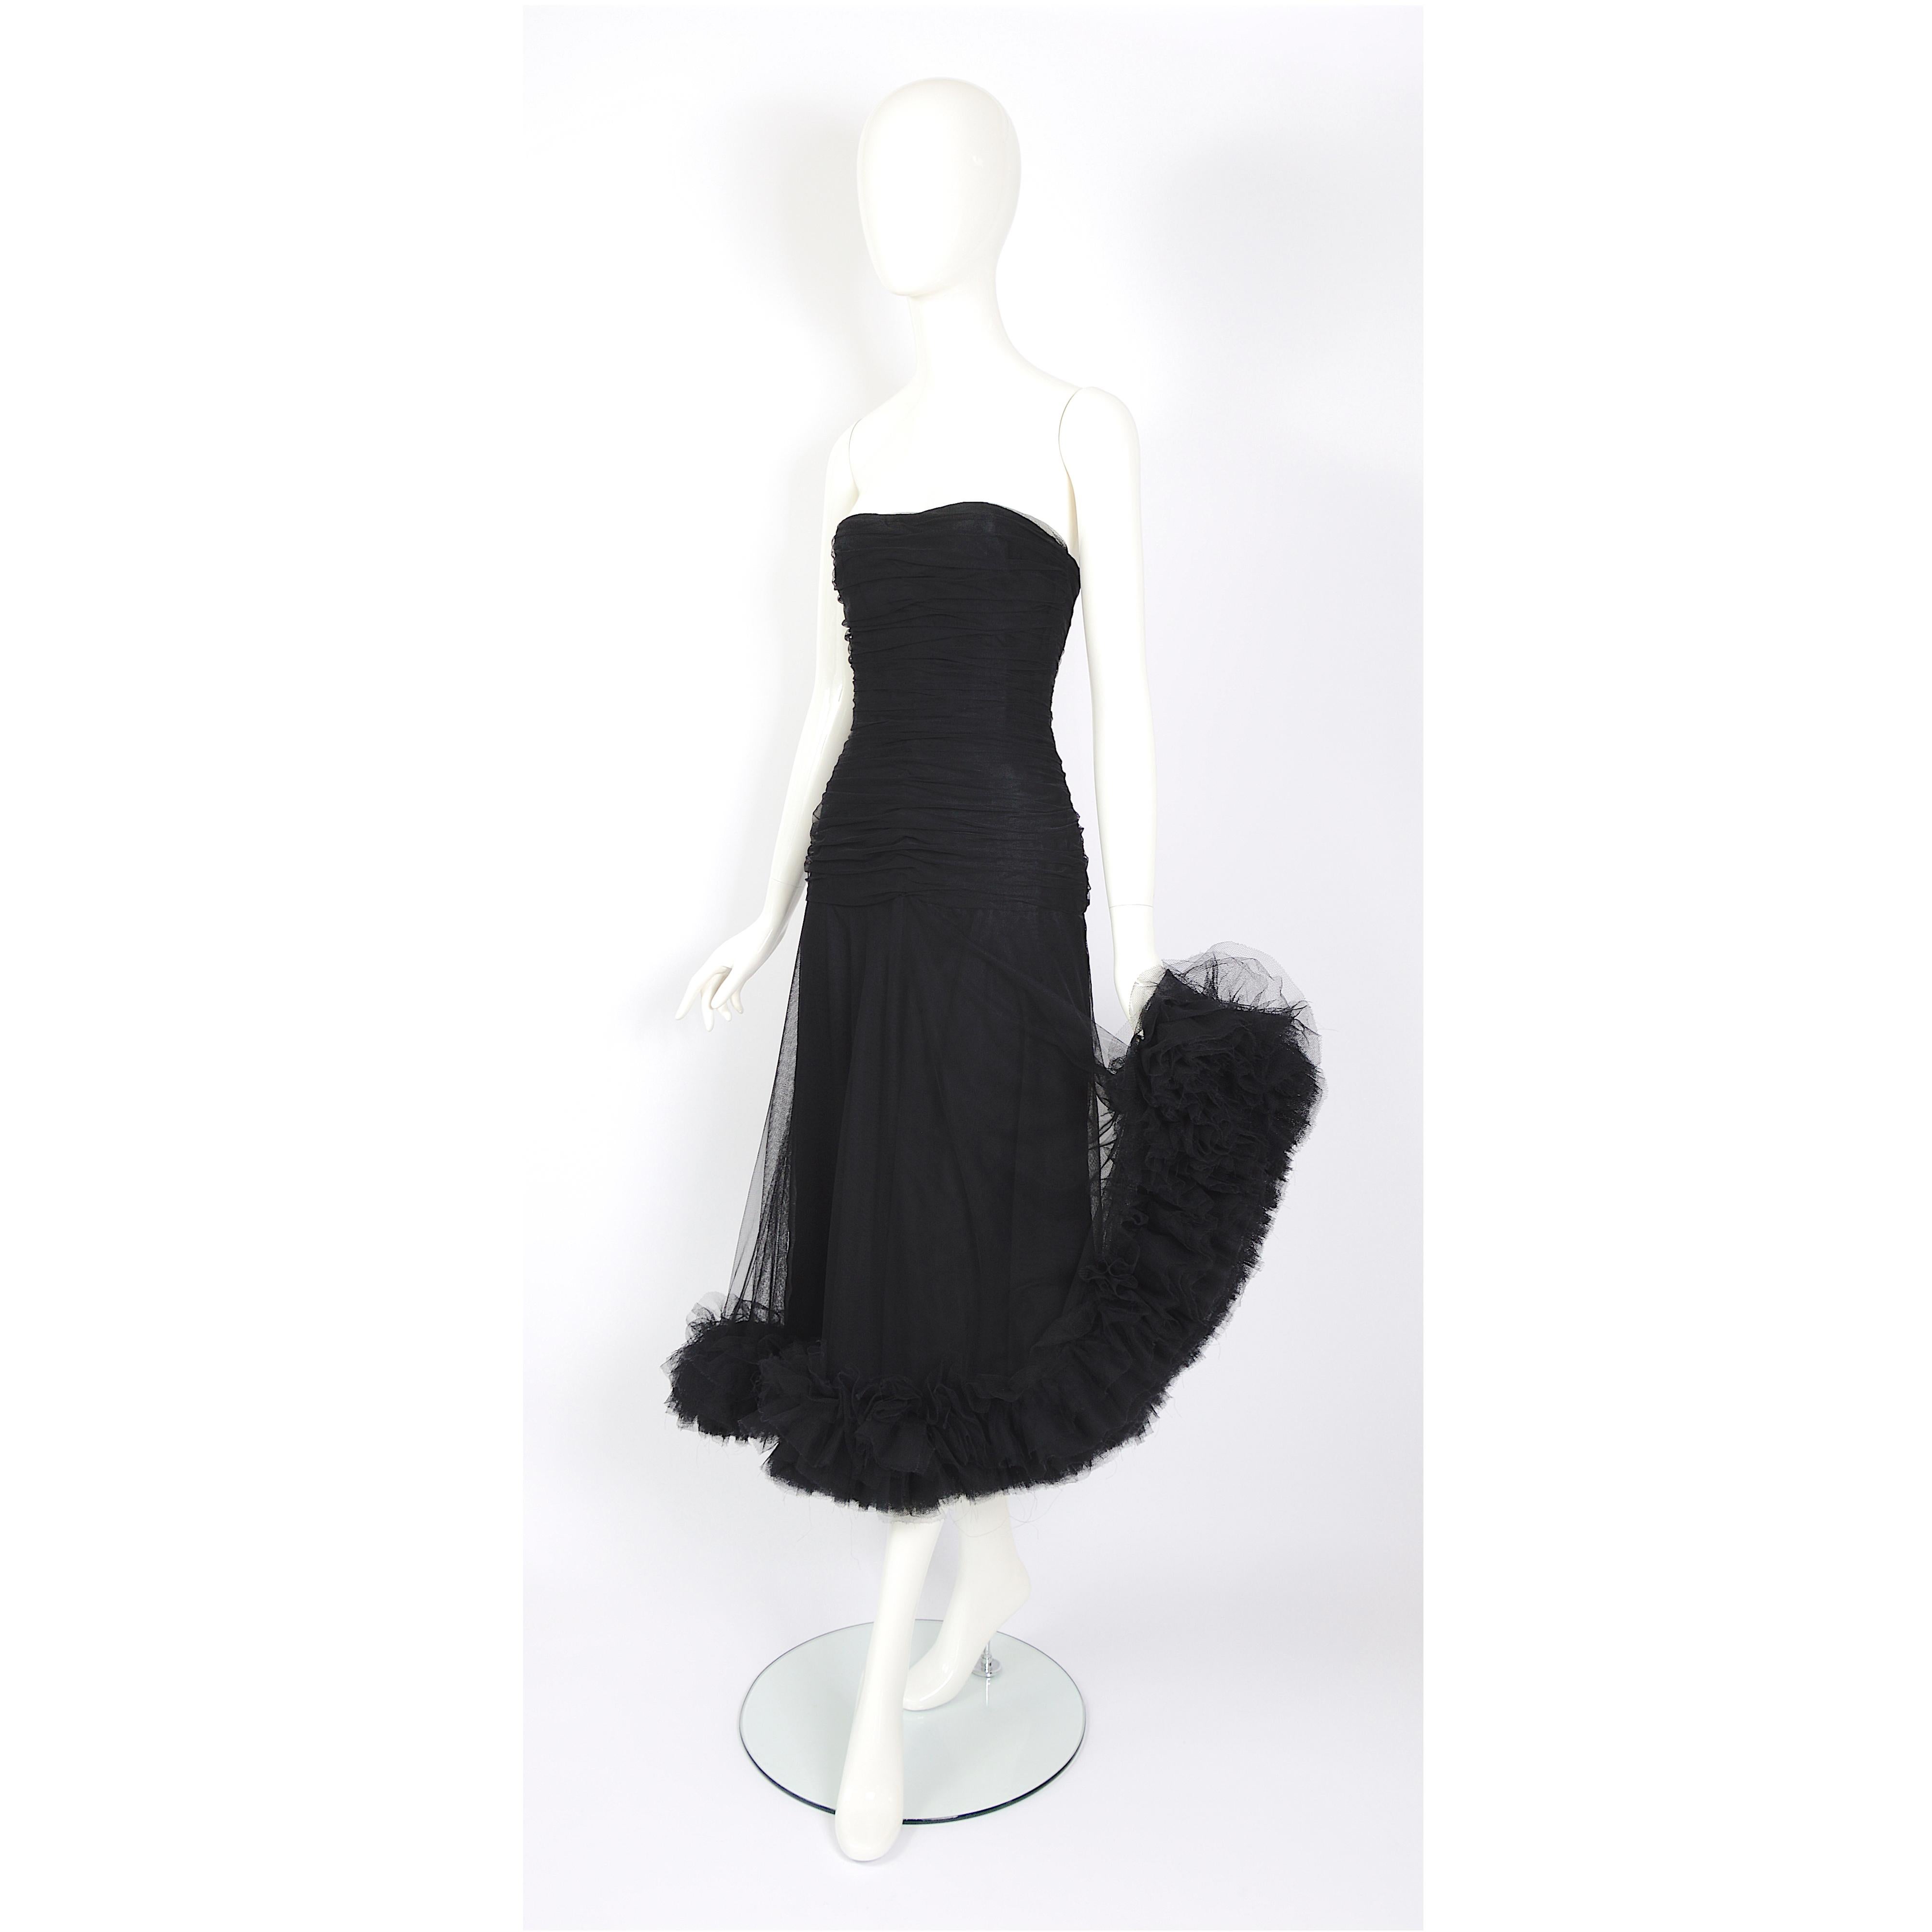 Christian Dior by Marc Bohan vintage numbered couture black tulle evening dress For Sale 4